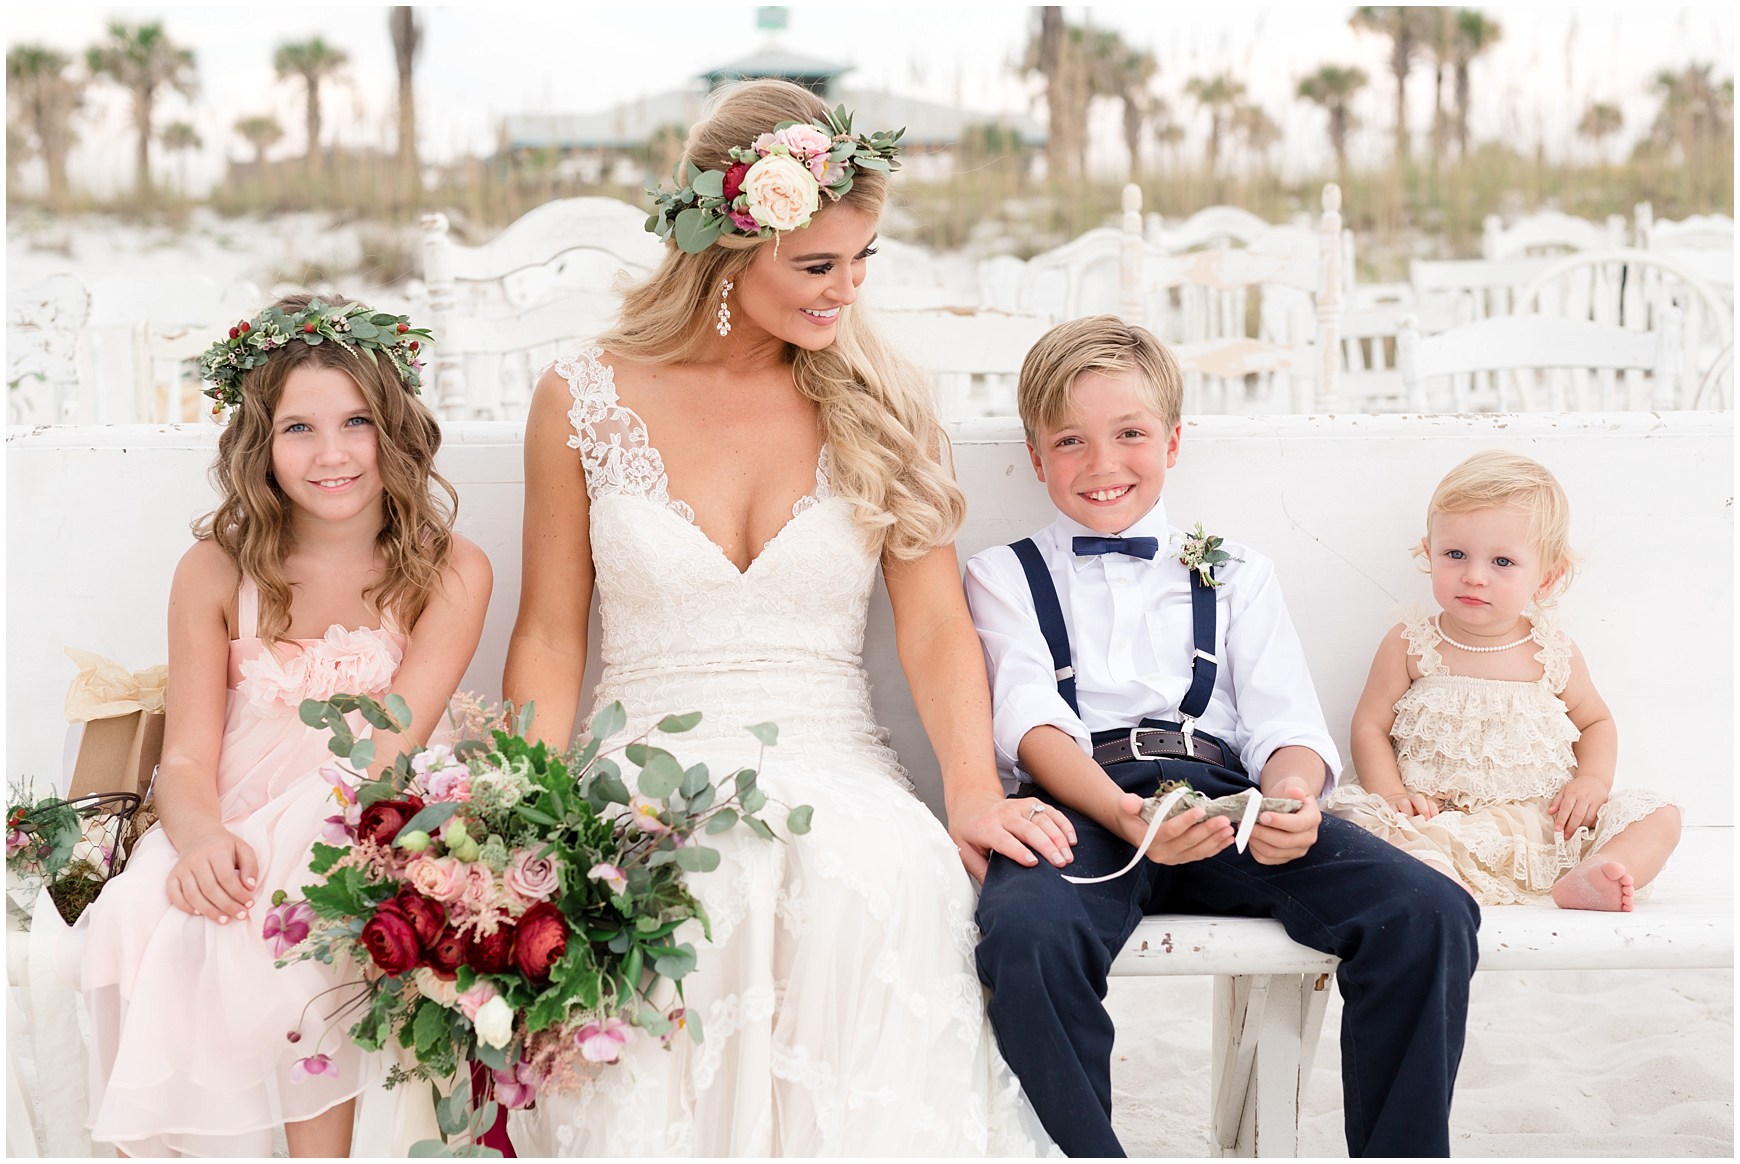 Bride with flower girls and ring bearer